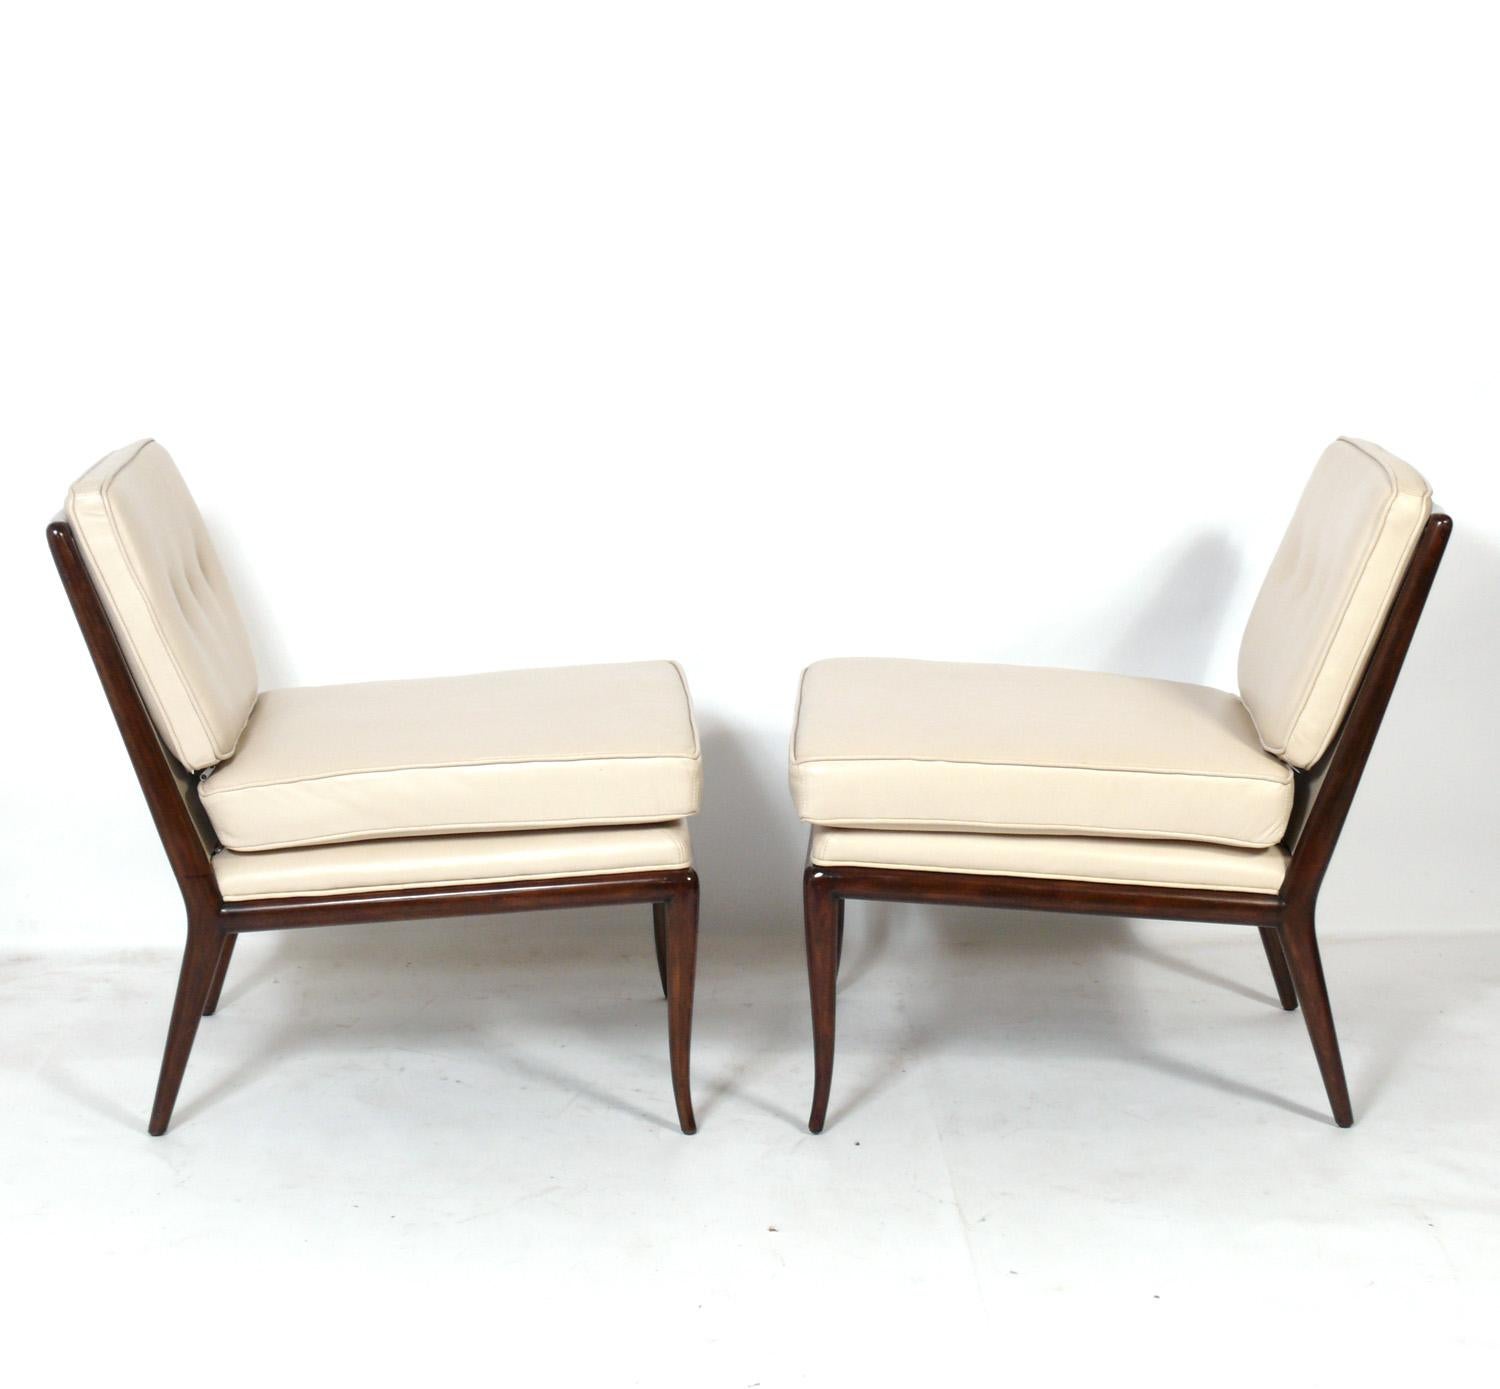 Elegant leather slipper lounge chairs, designed by T.H. Robsjohn Gibbings for Widdicomb, American, circa 1950s. They have been refinished and reupholstered in leather.